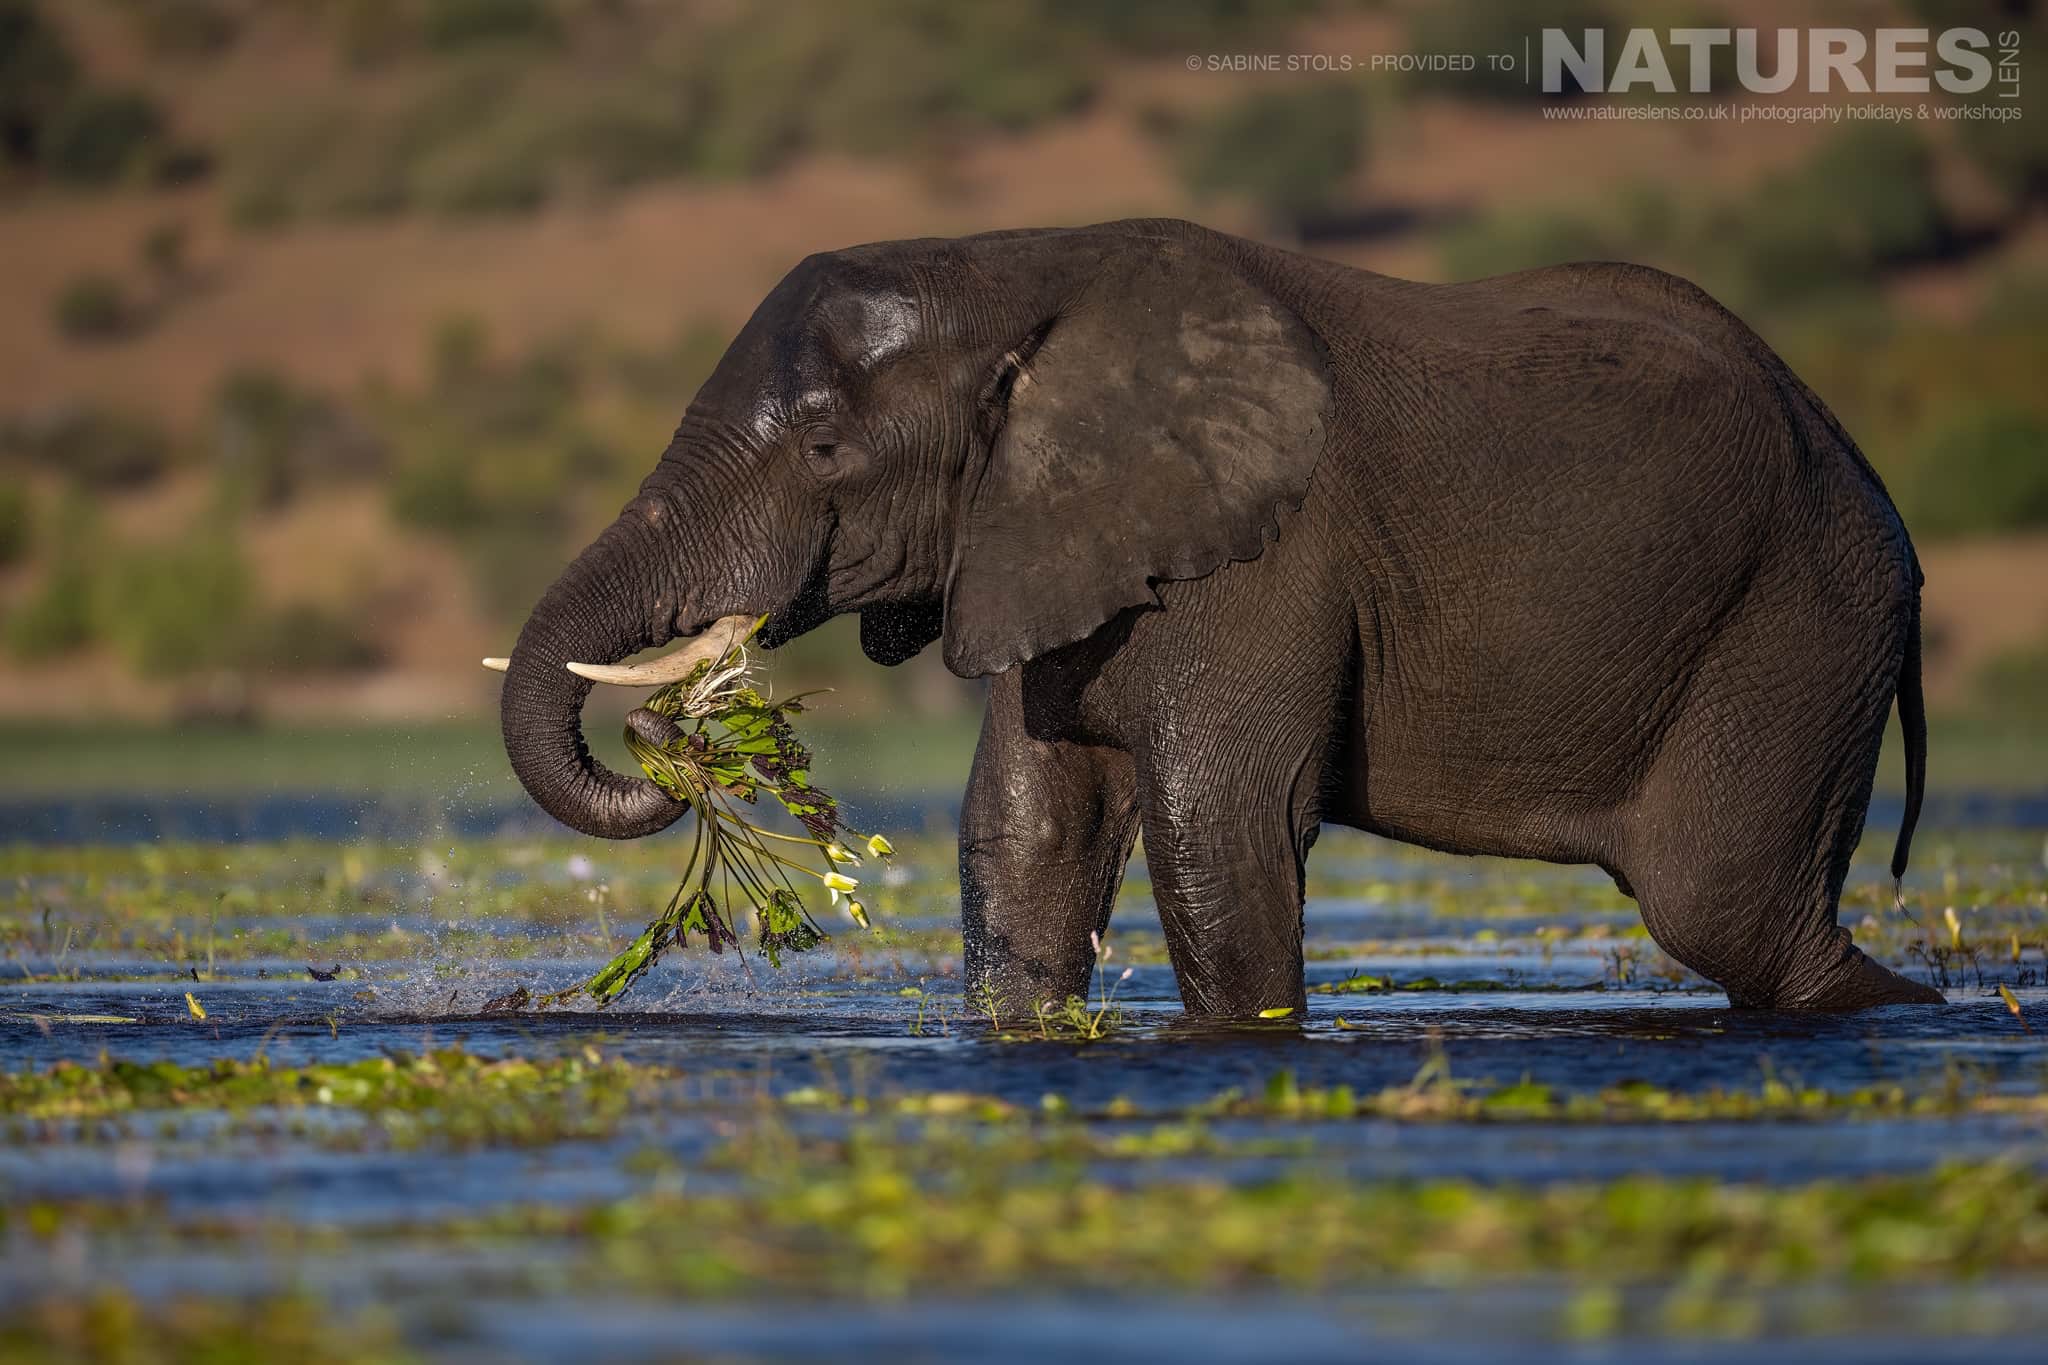 An Elephant Feeding On Lilies From The Chobe River